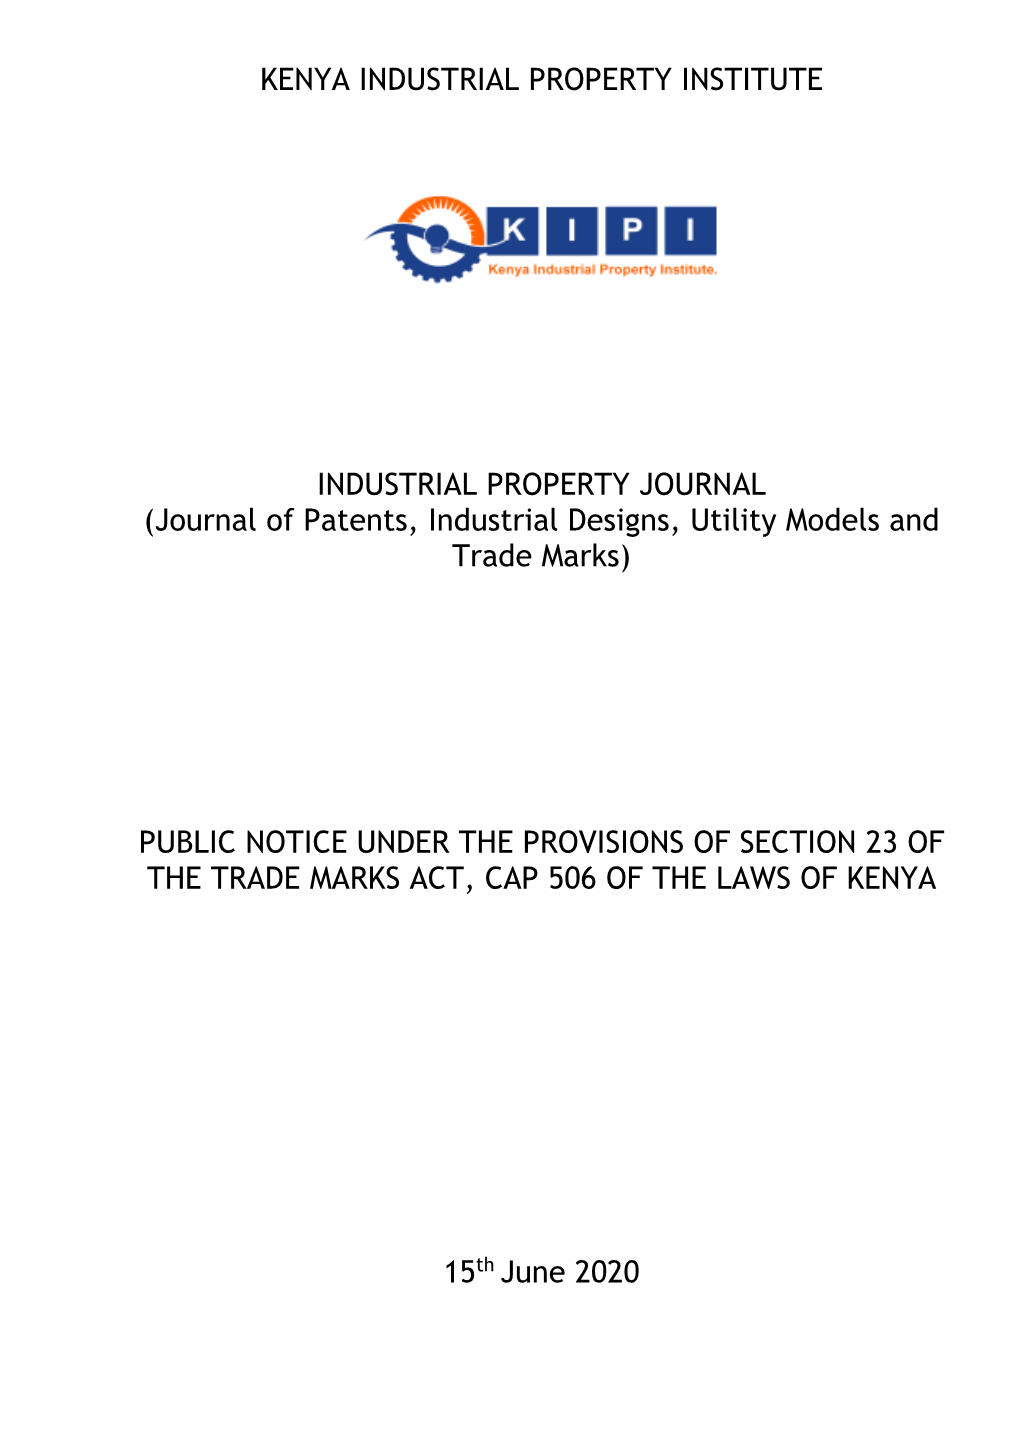 Journal of Patents, Industrial Designs, Utility Models and Trade Marks)